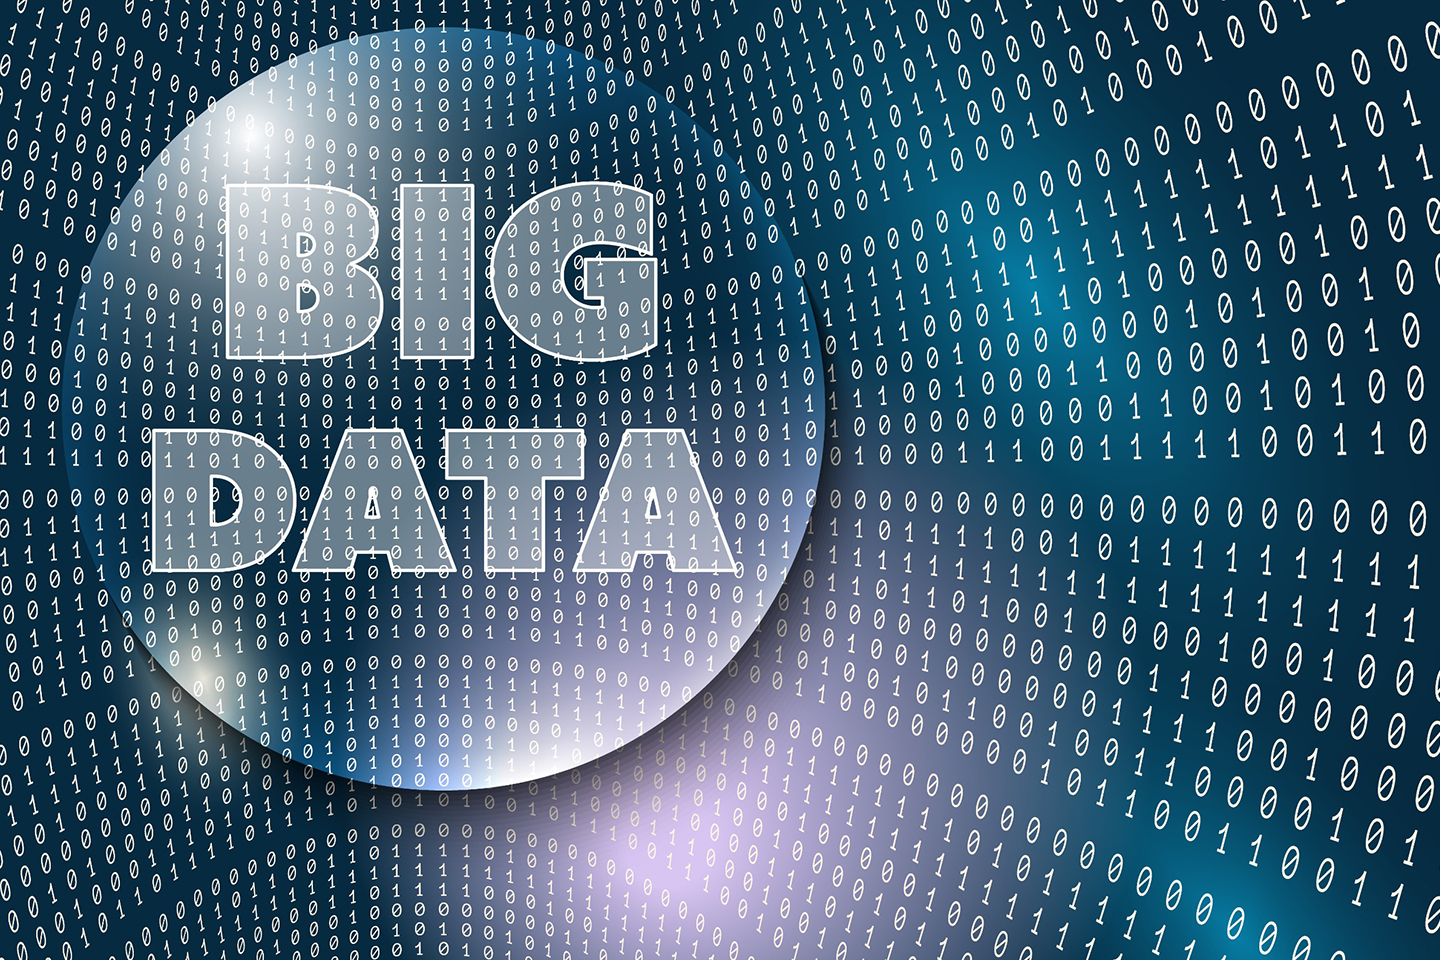 Five Uses of Big Data Analytics in Business Process Management